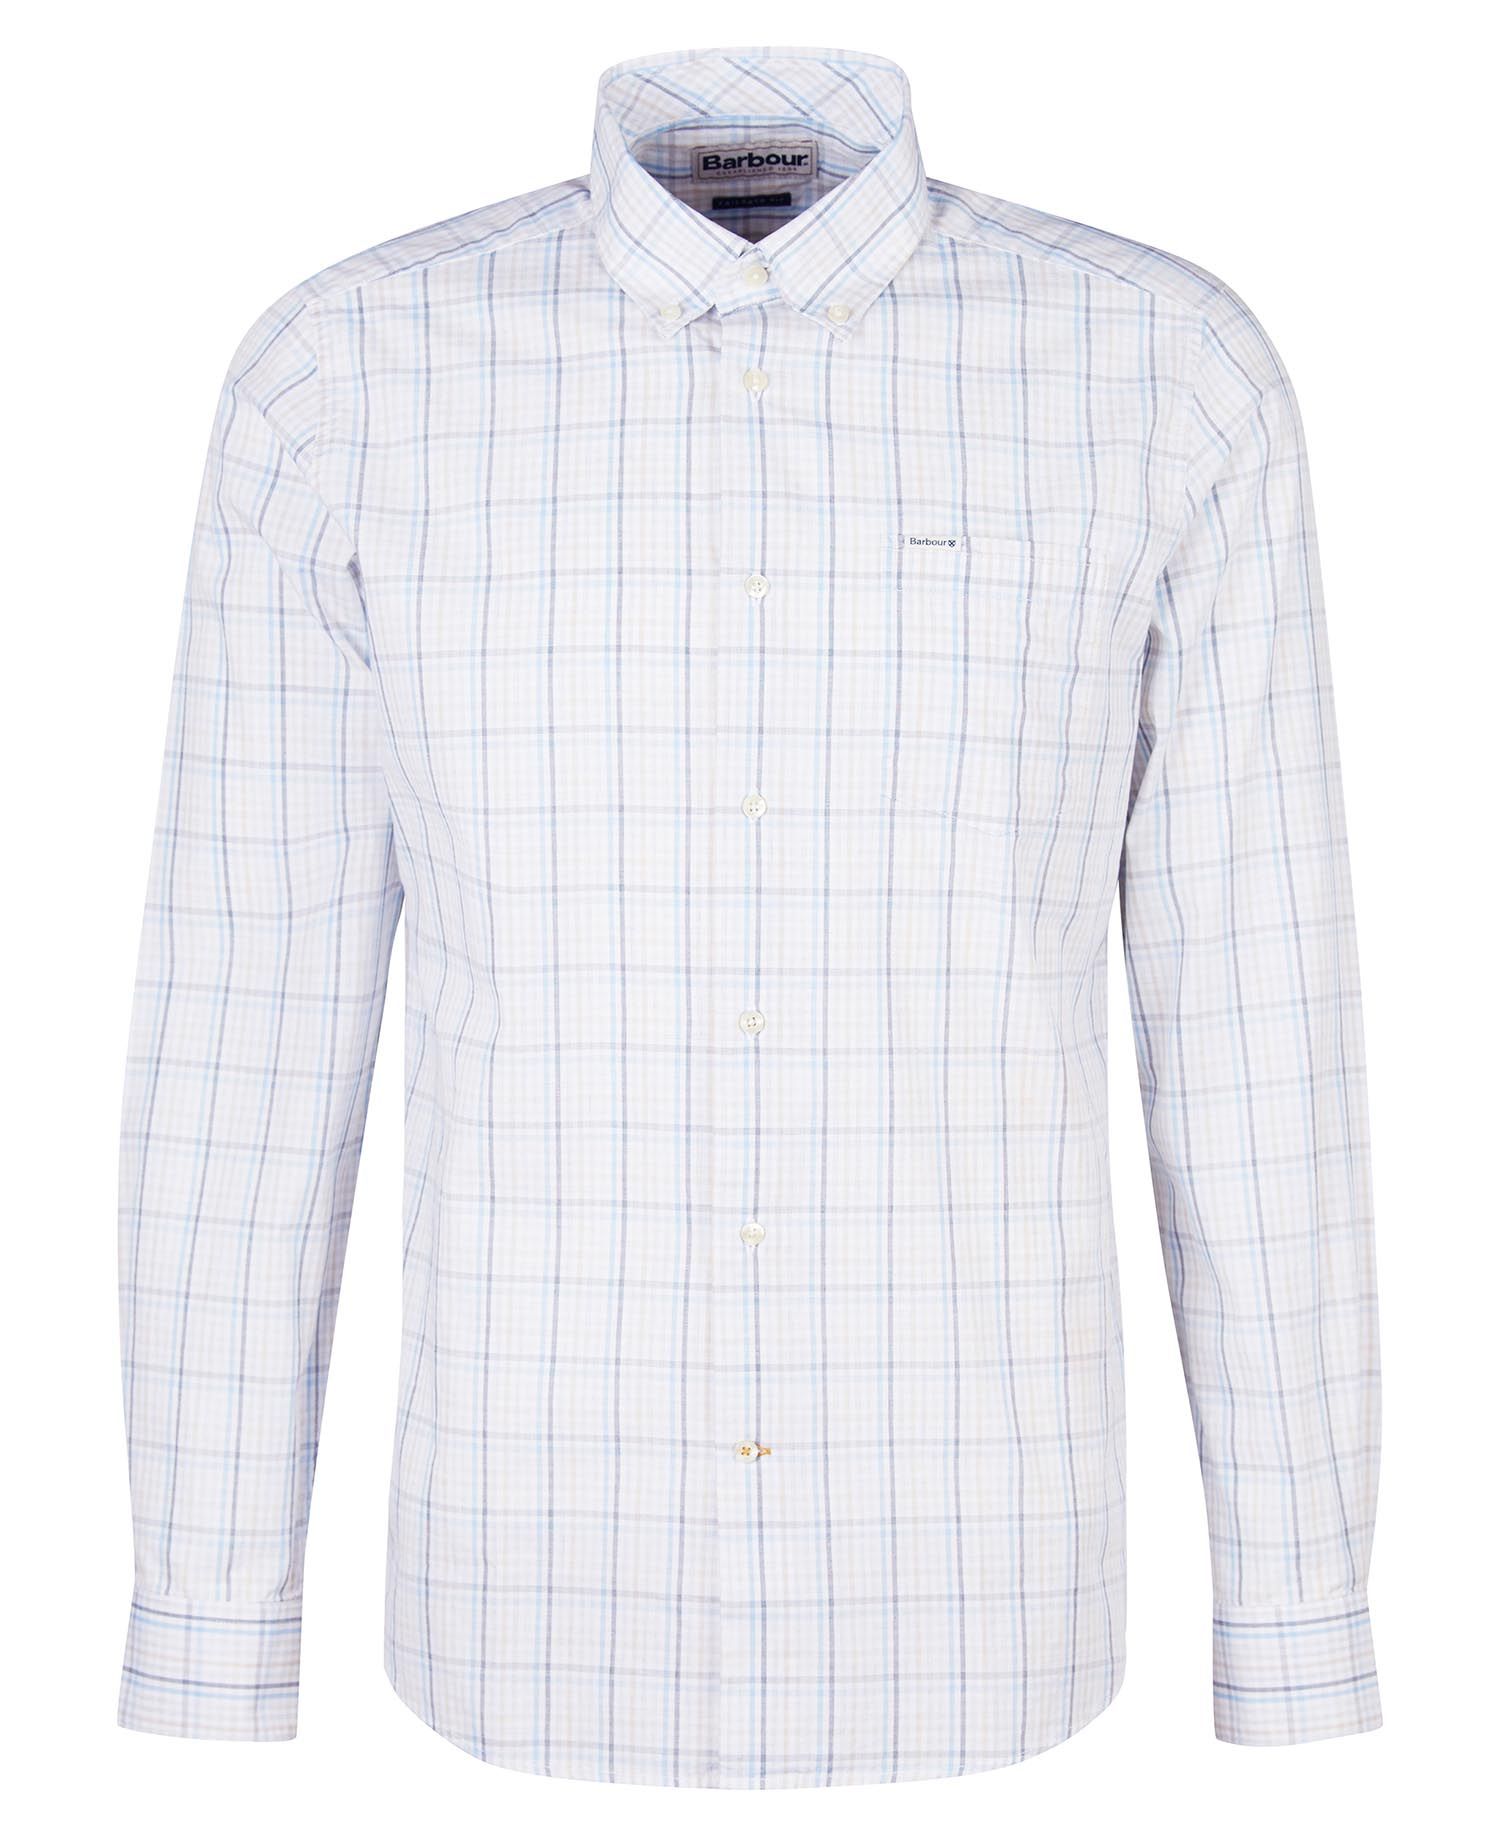 Barbour Alnwick Tailored Shirt